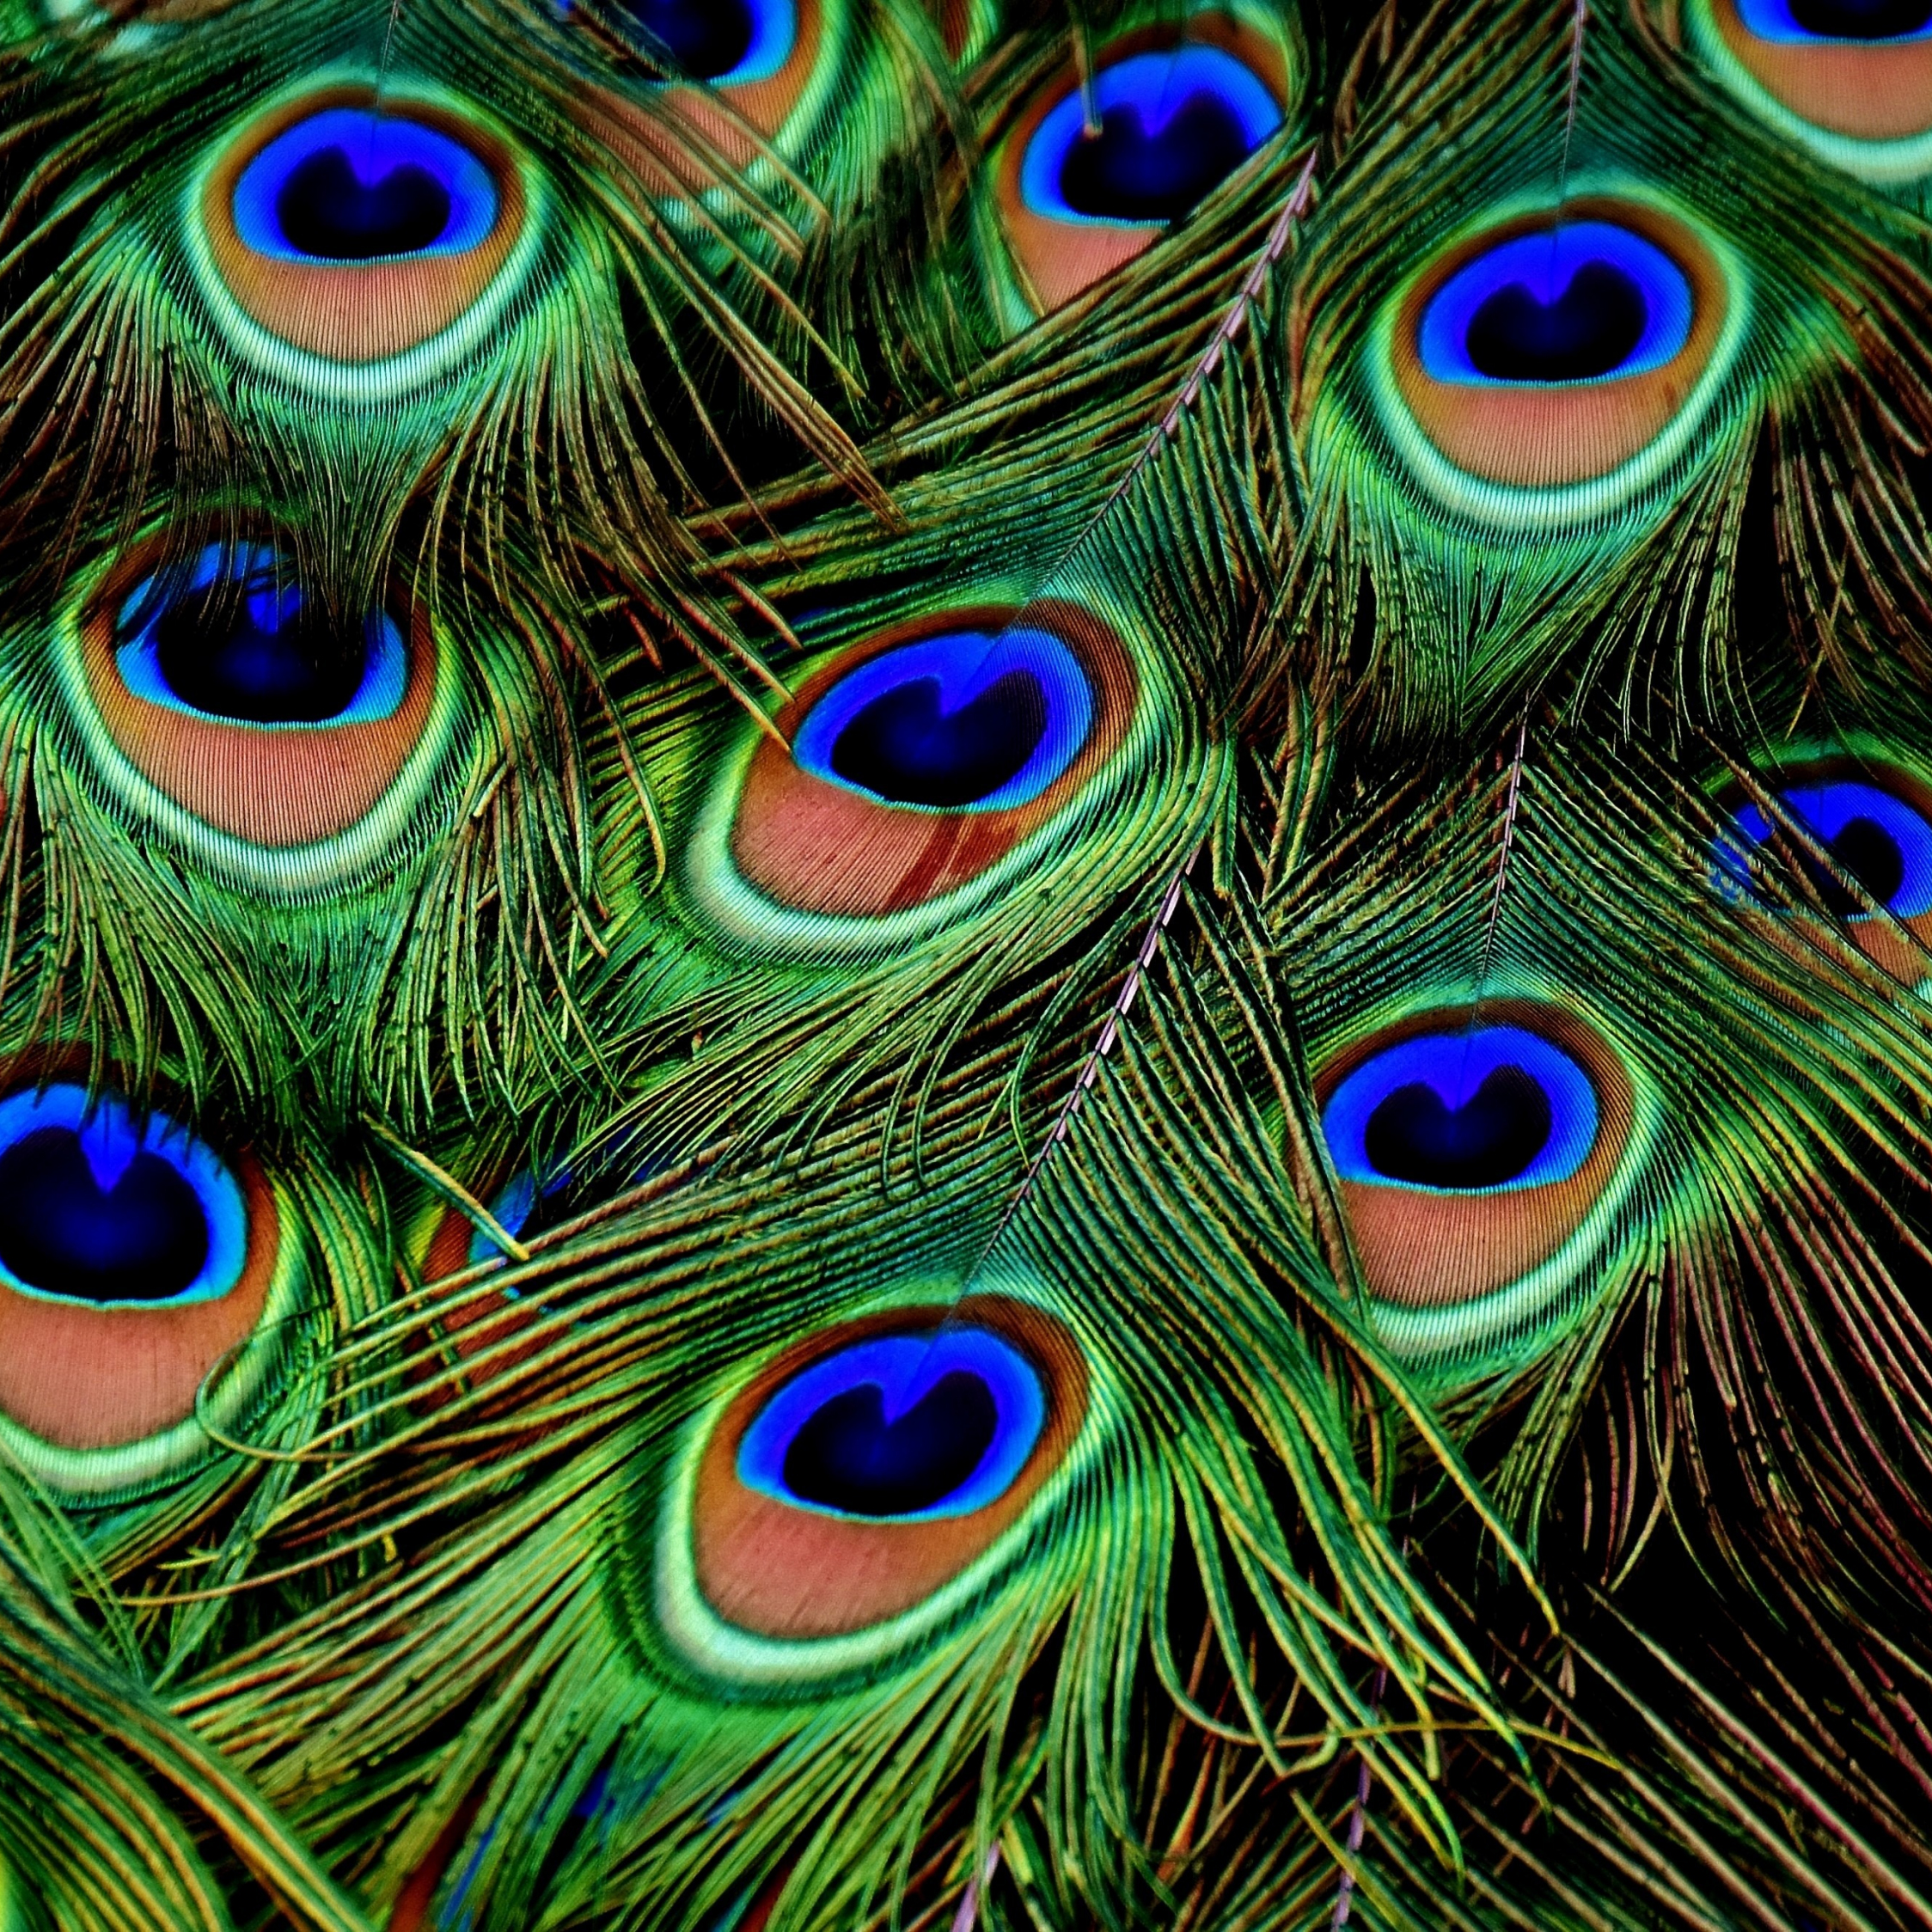 Download wallpaper 2248x2248 peacock, feathers, colorful, plumage, ipad  air, ipad air 2, ipad 3, ipad 4, ipad mini 2, ipad mini 3, 2248x2248 hd  background, 1541